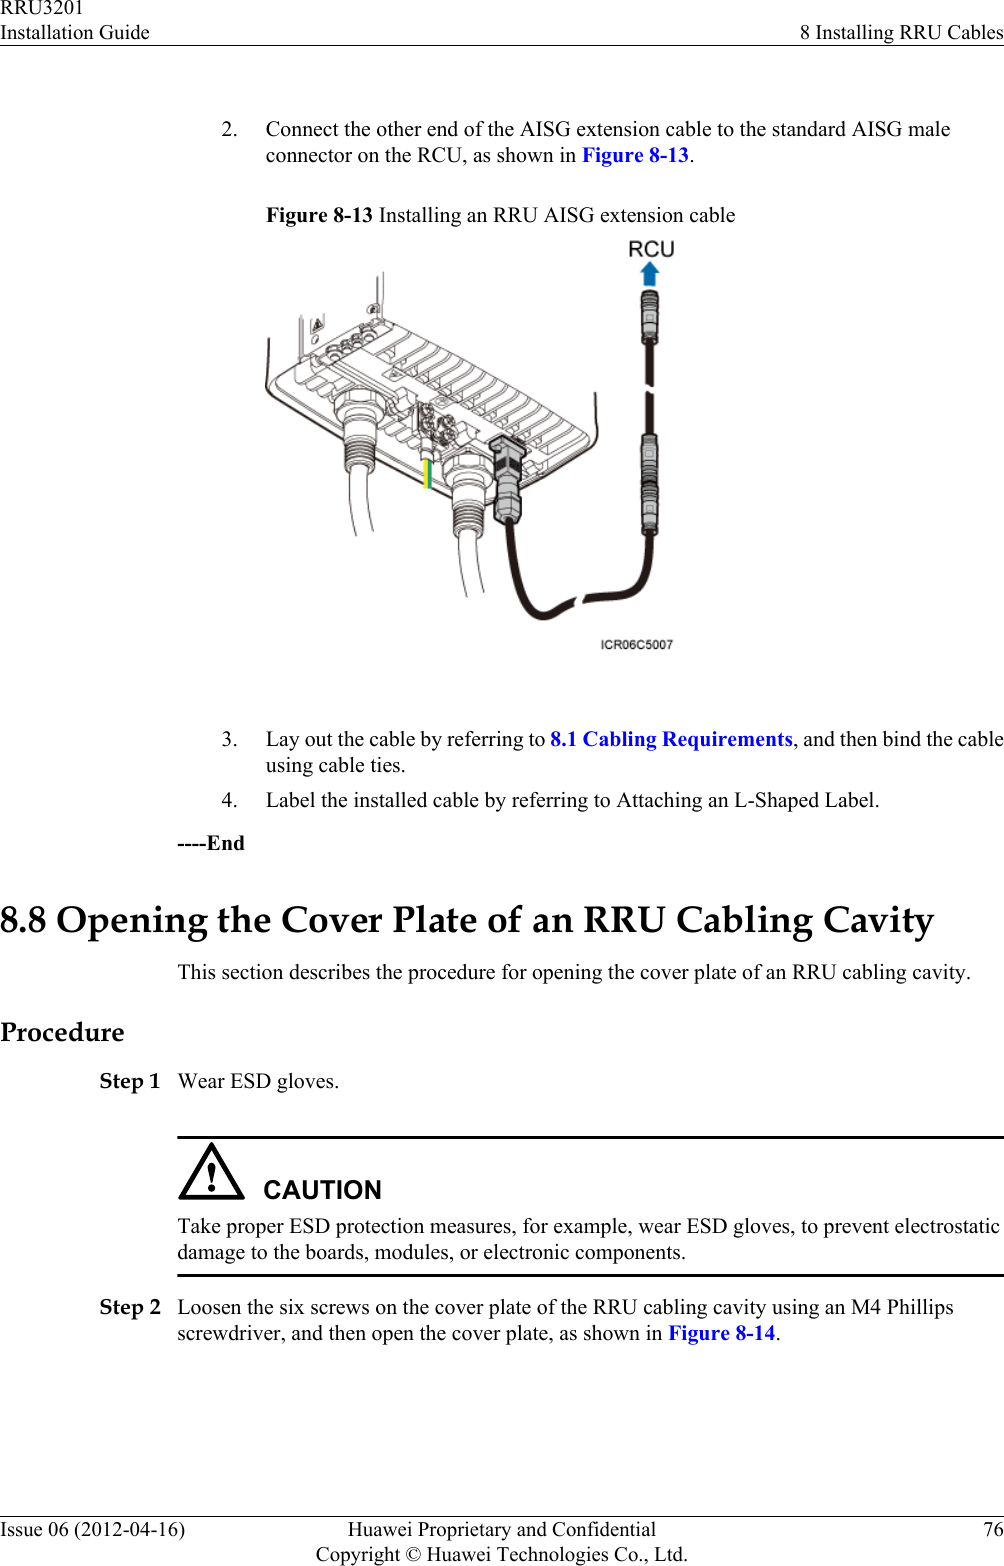  2. Connect the other end of the AISG extension cable to the standard AISG maleconnector on the RCU, as shown in Figure 8-13.Figure 8-13 Installing an RRU AISG extension cable 3. Lay out the cable by referring to 8.1 Cabling Requirements, and then bind the cableusing cable ties.4. Label the installed cable by referring to Attaching an L-Shaped Label.----End8.8 Opening the Cover Plate of an RRU Cabling CavityThis section describes the procedure for opening the cover plate of an RRU cabling cavity.ProcedureStep 1 Wear ESD gloves.CAUTIONTake proper ESD protection measures, for example, wear ESD gloves, to prevent electrostaticdamage to the boards, modules, or electronic components.Step 2 Loosen the six screws on the cover plate of the RRU cabling cavity using an M4 Phillipsscrewdriver, and then open the cover plate, as shown in Figure 8-14.RRU3201Installation Guide 8 Installing RRU CablesIssue 06 (2012-04-16) Huawei Proprietary and ConfidentialCopyright © Huawei Technologies Co., Ltd.76